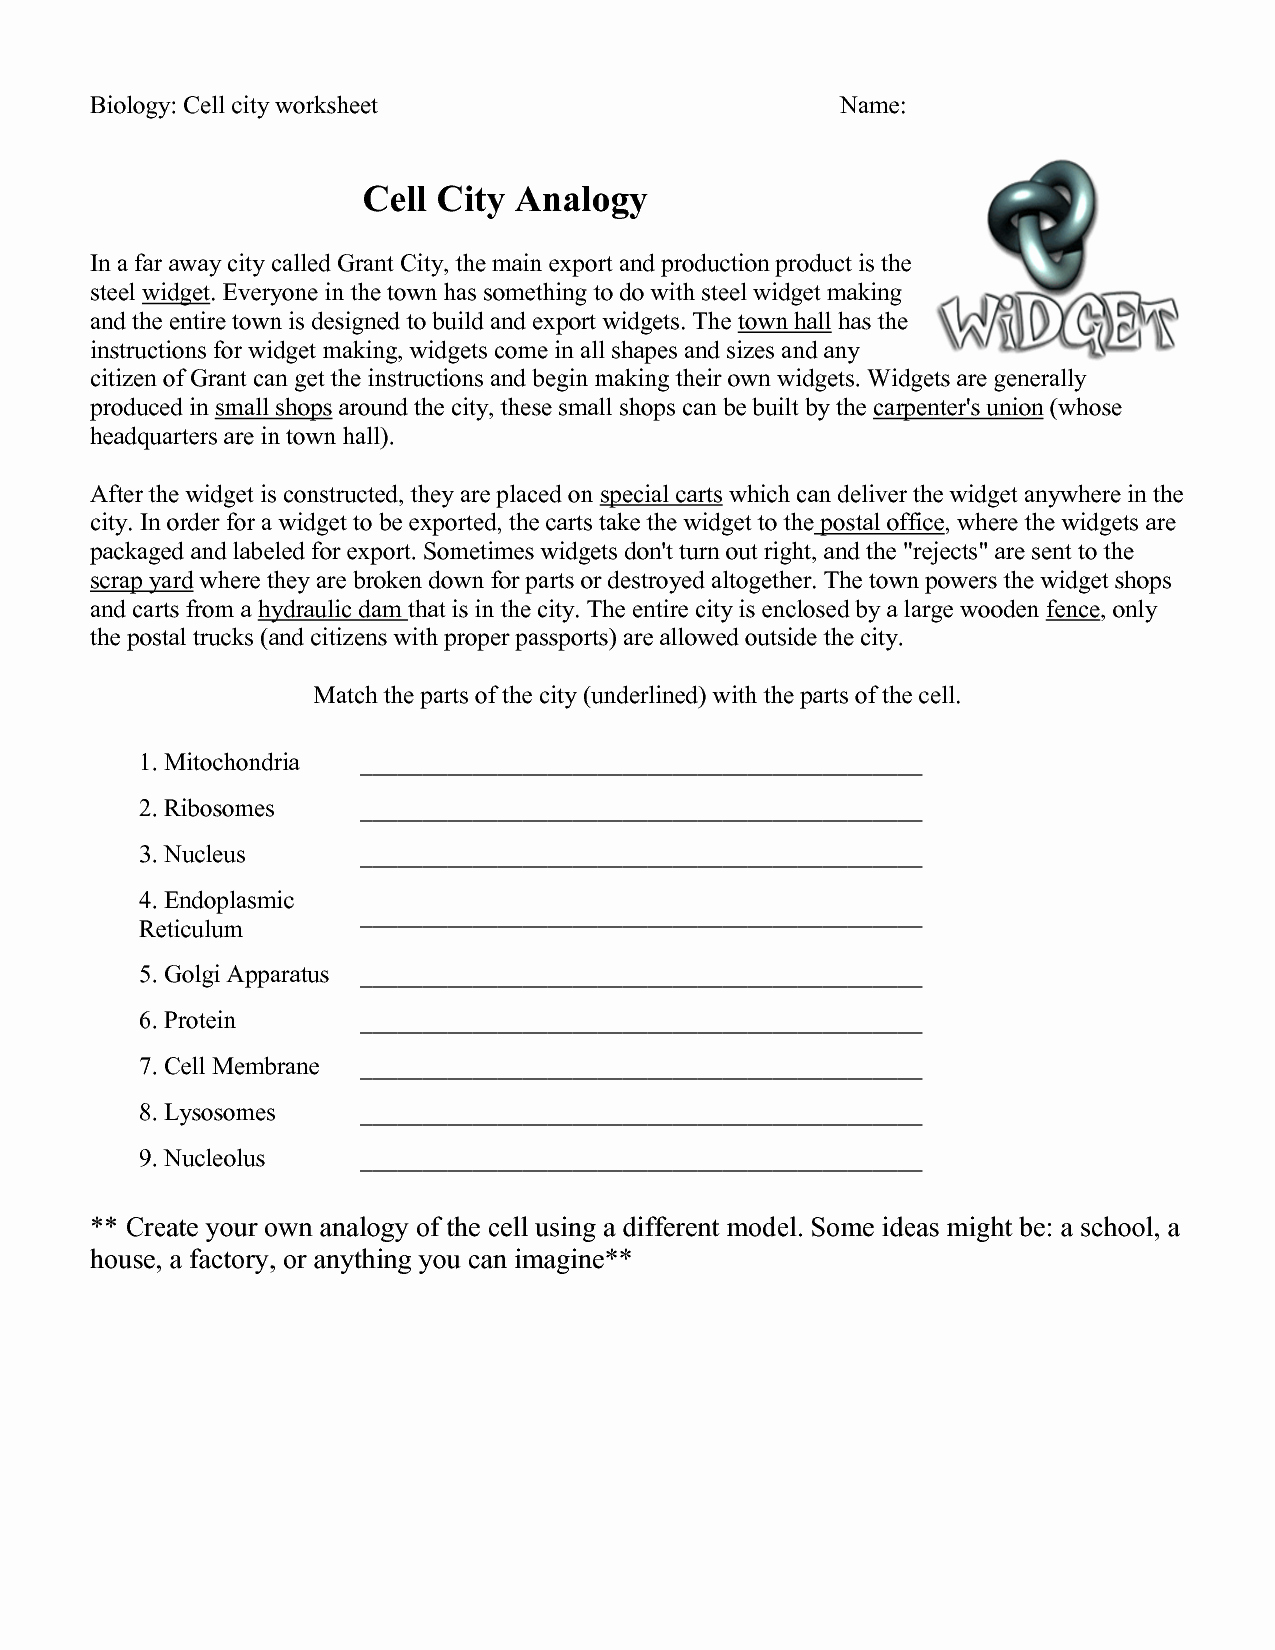 Cell City Analogy Worksheet New 18 Best Of Biology Cells Worksheets Answer Keys